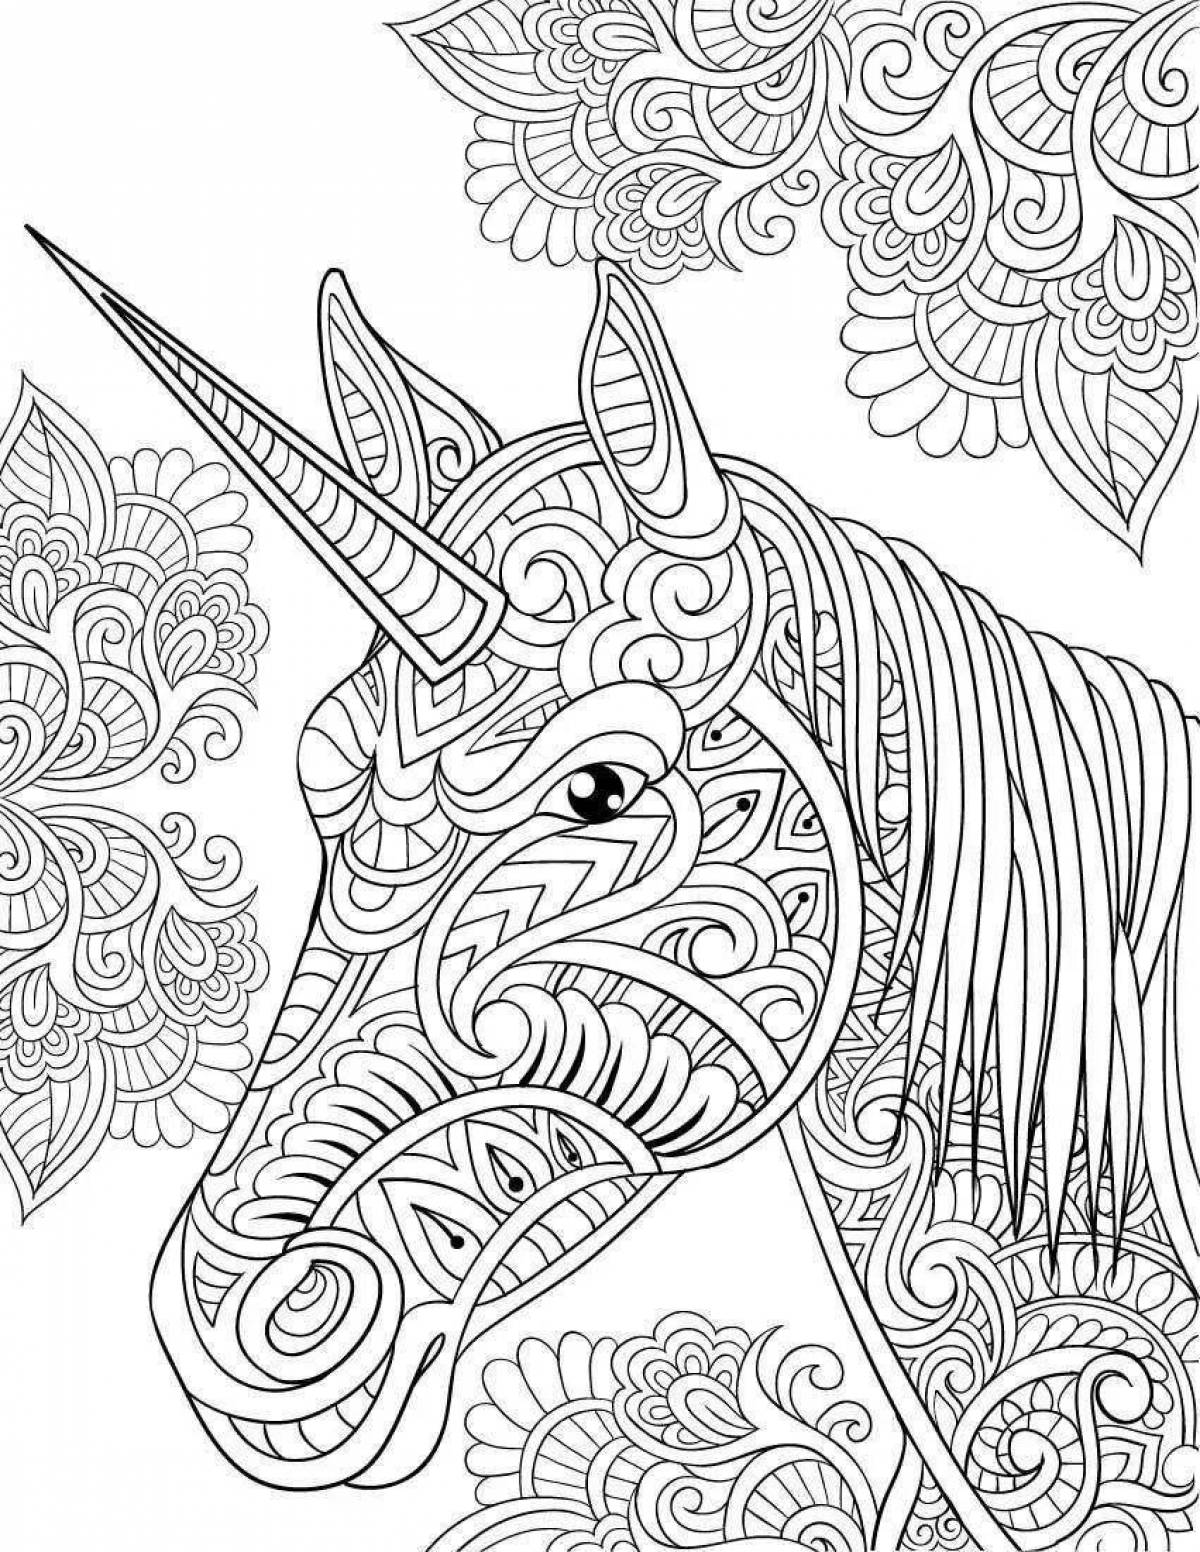 Soothing anti-stress animal coloring book for kids